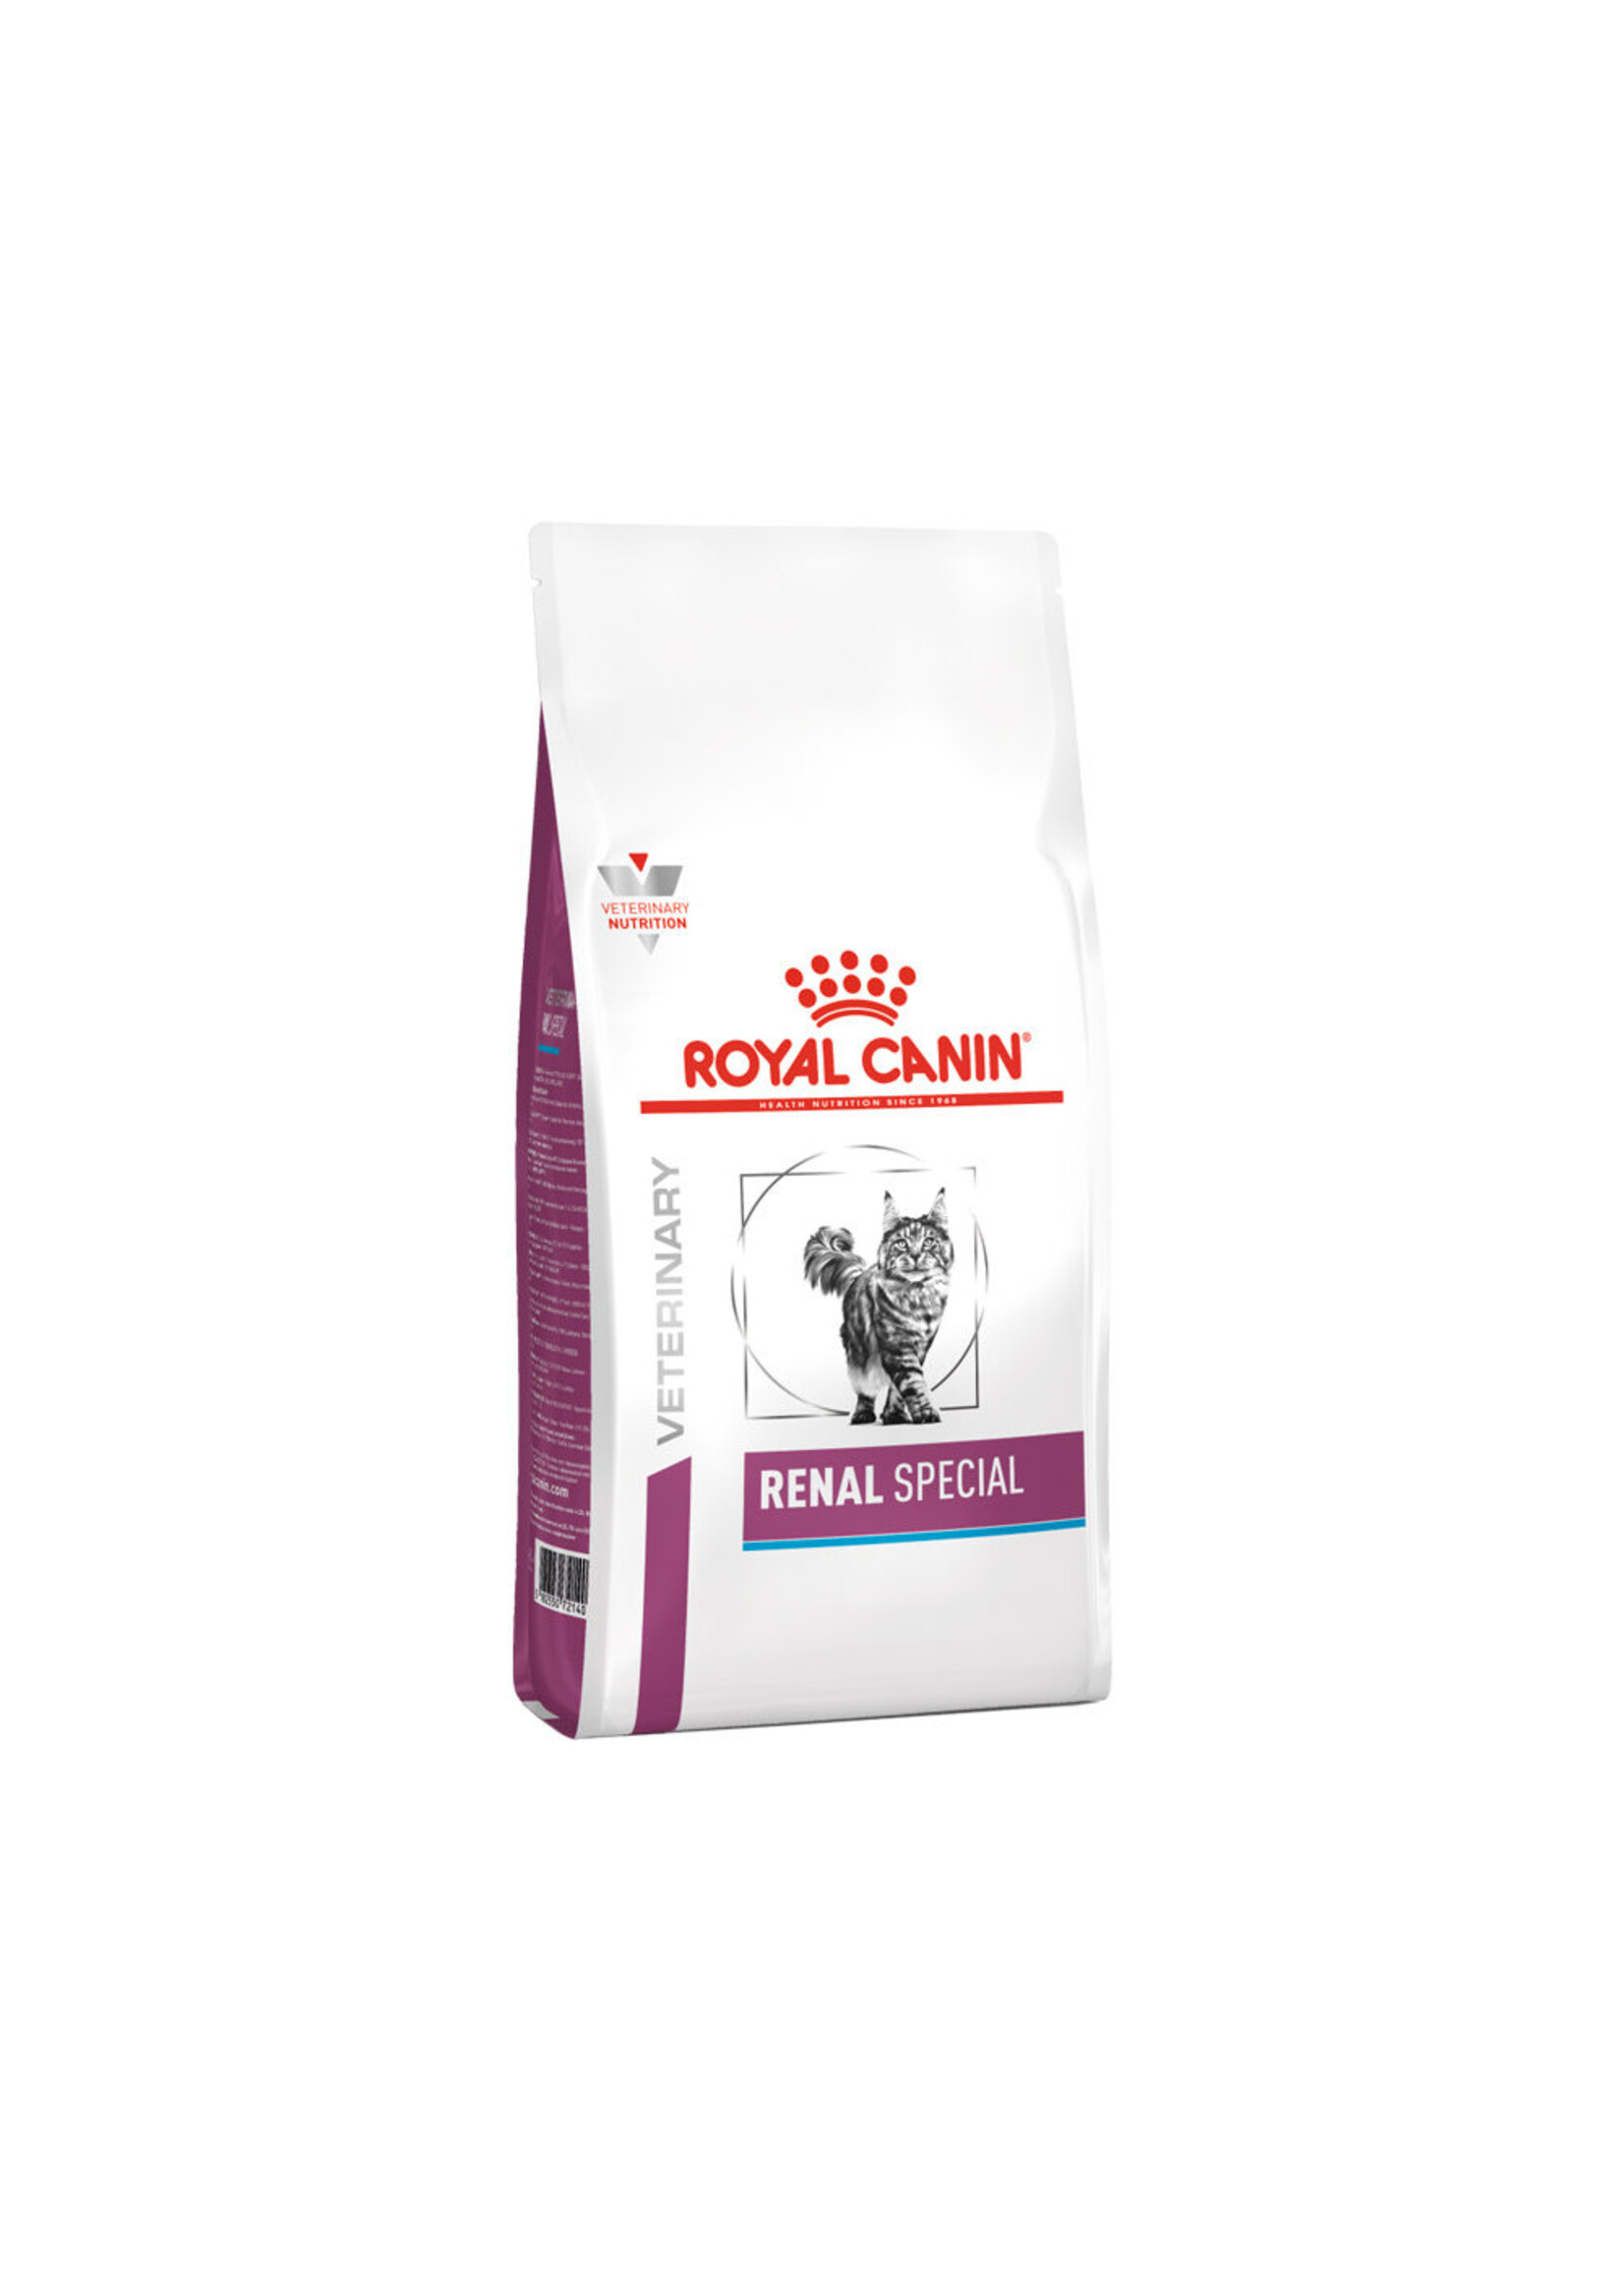 Royal Canin Royal Canin Vdiet Renal Special Katze 4kg